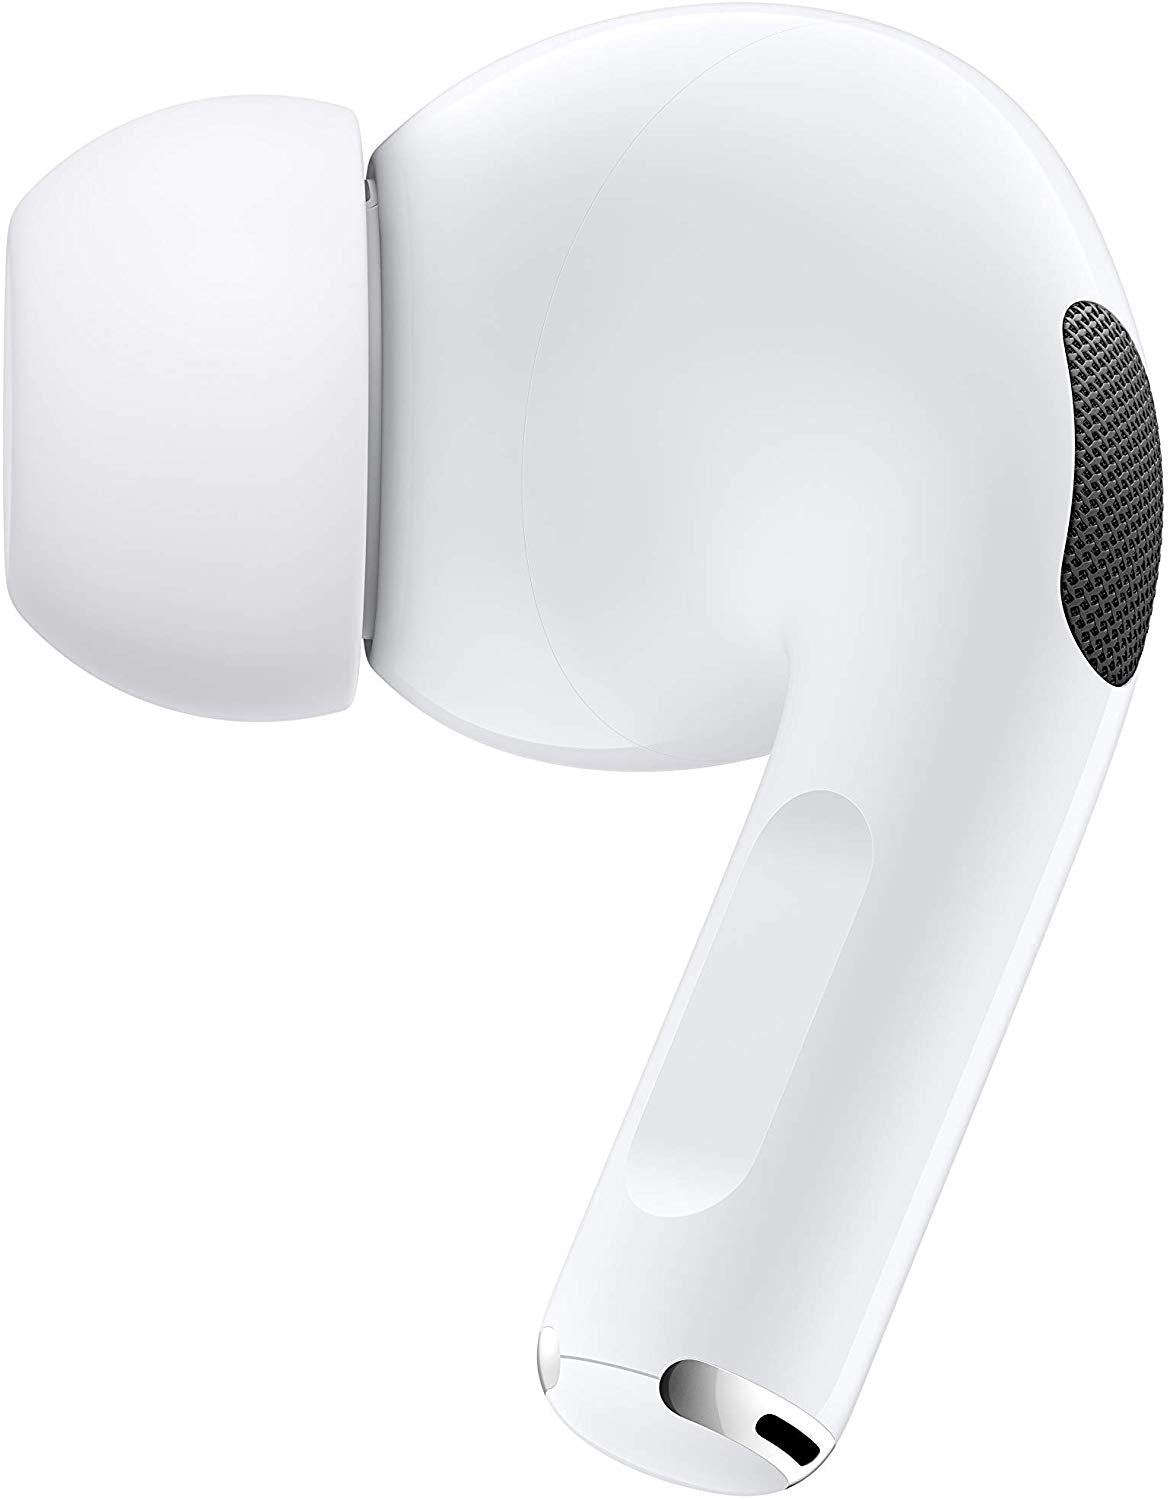 AirPods Pro 2 — Apple — AirPods with Retina HD Display! 